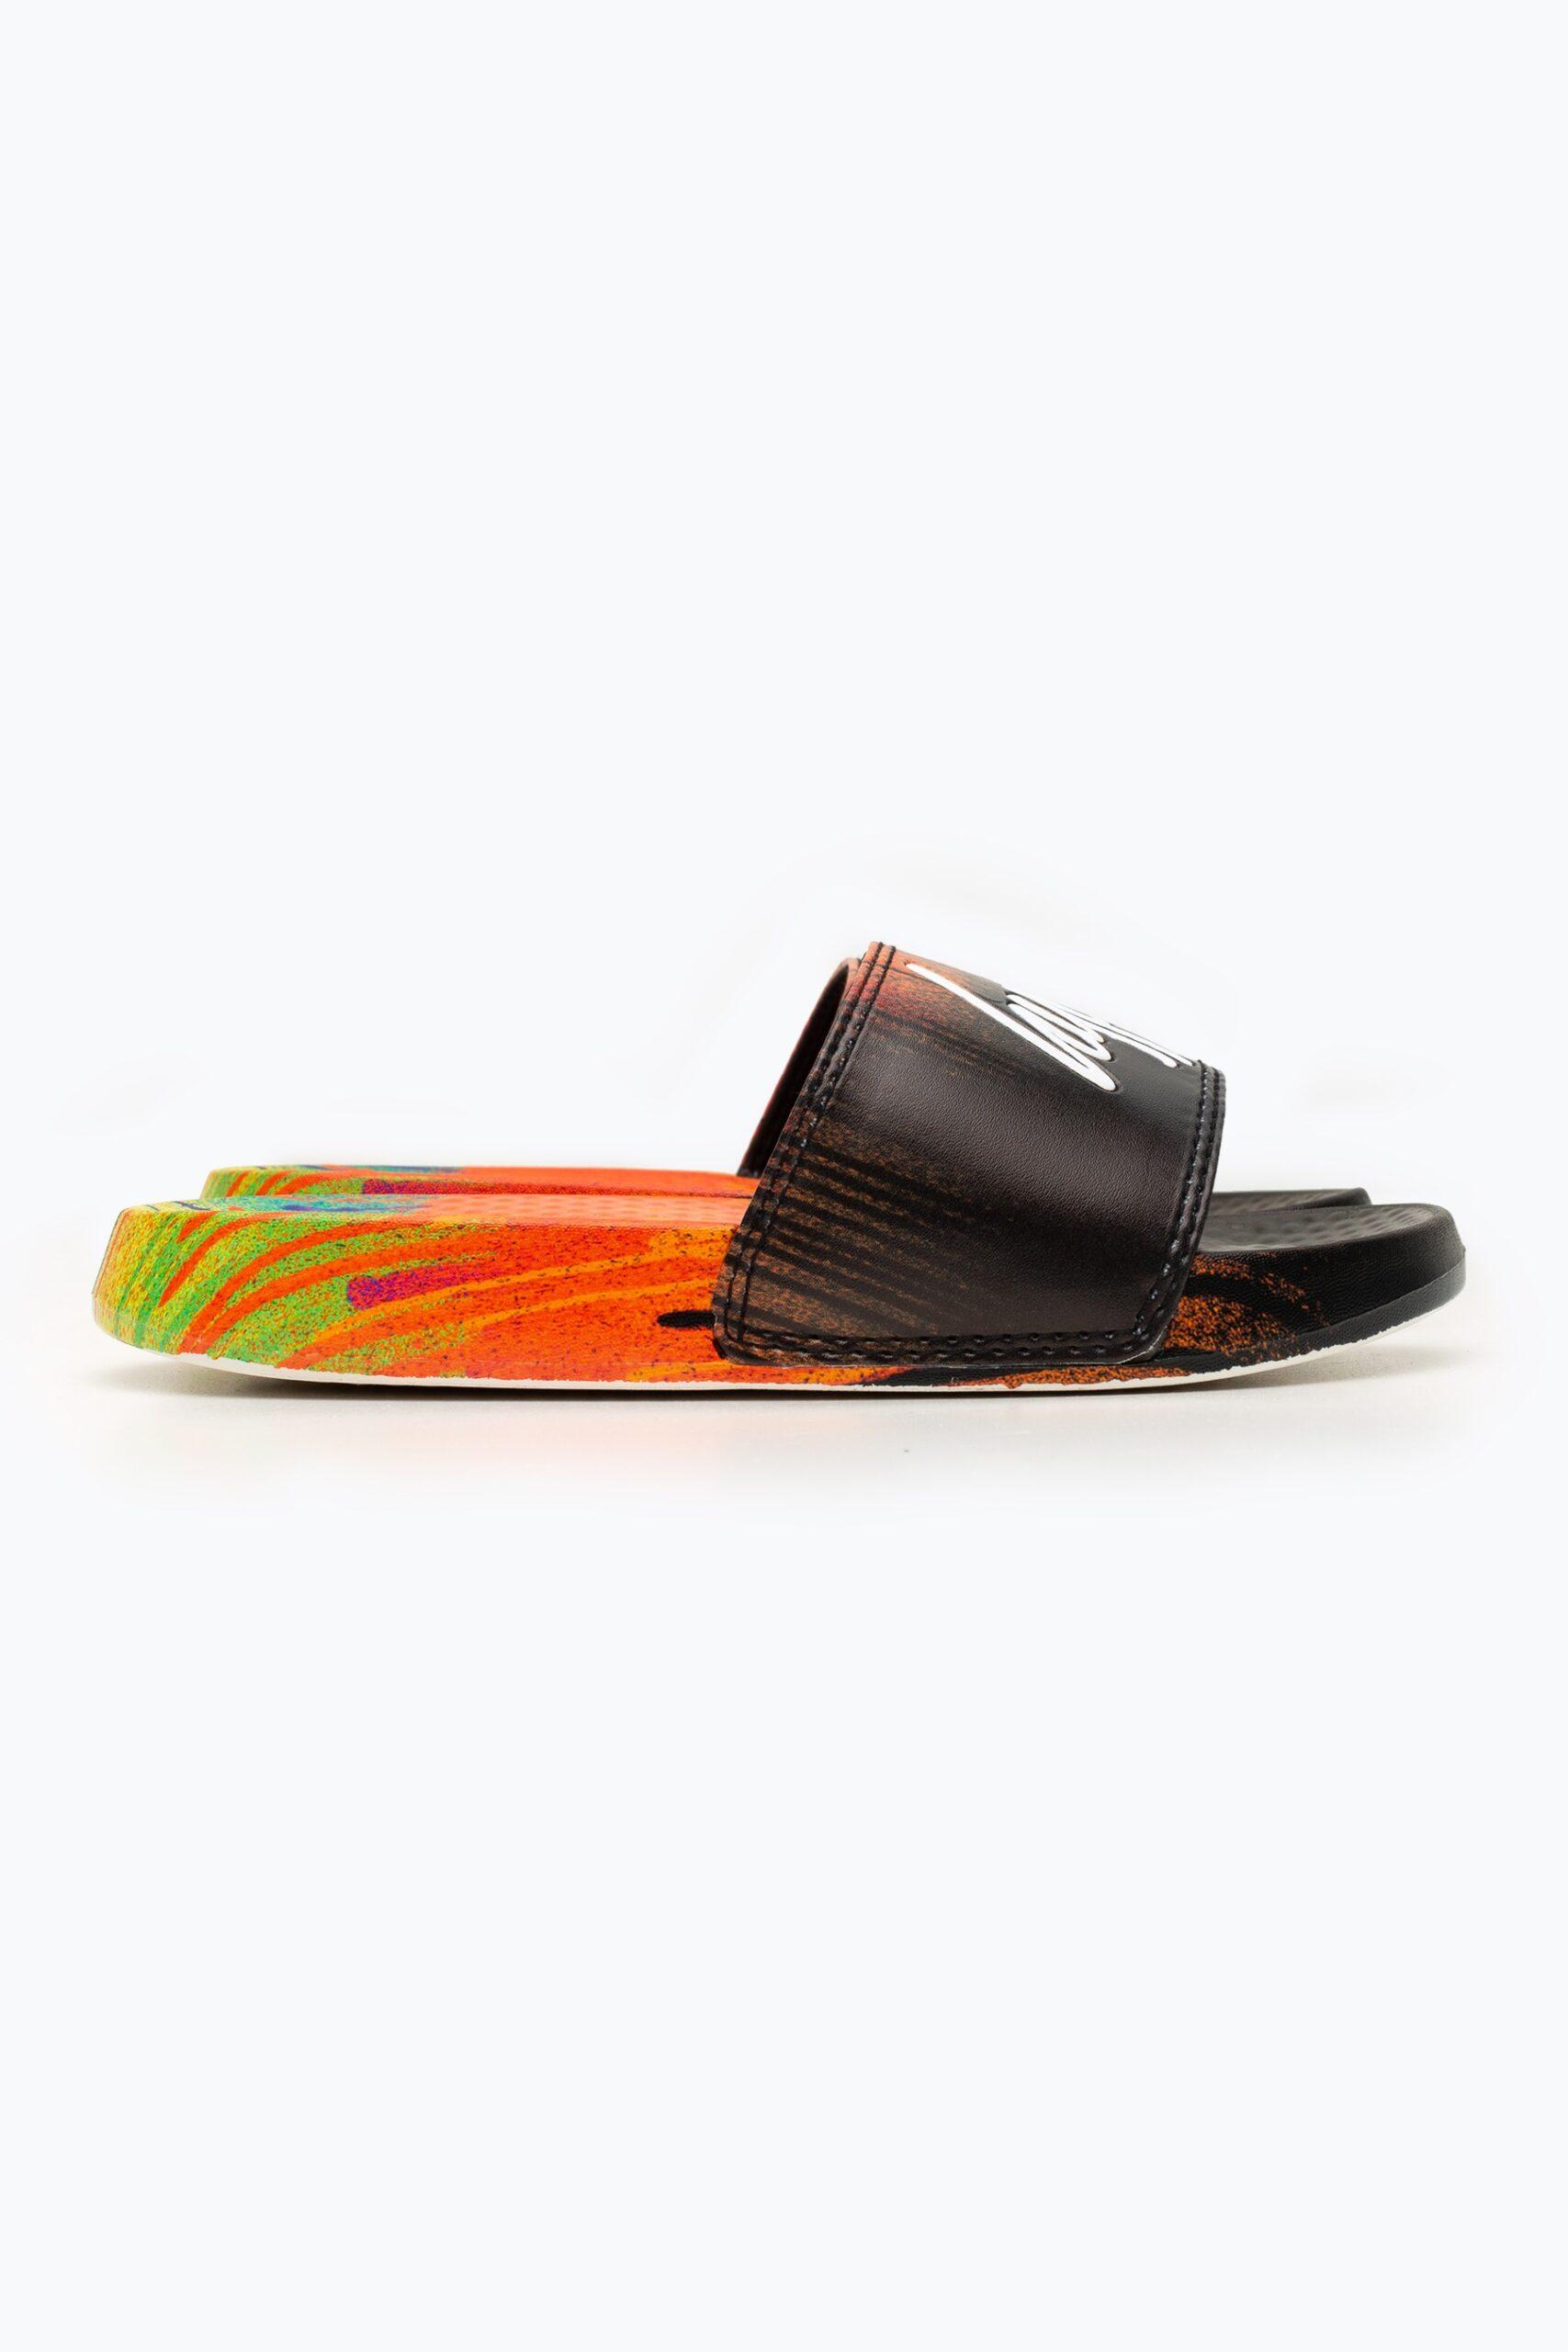 Hype multi coloured paint drip sliders side view